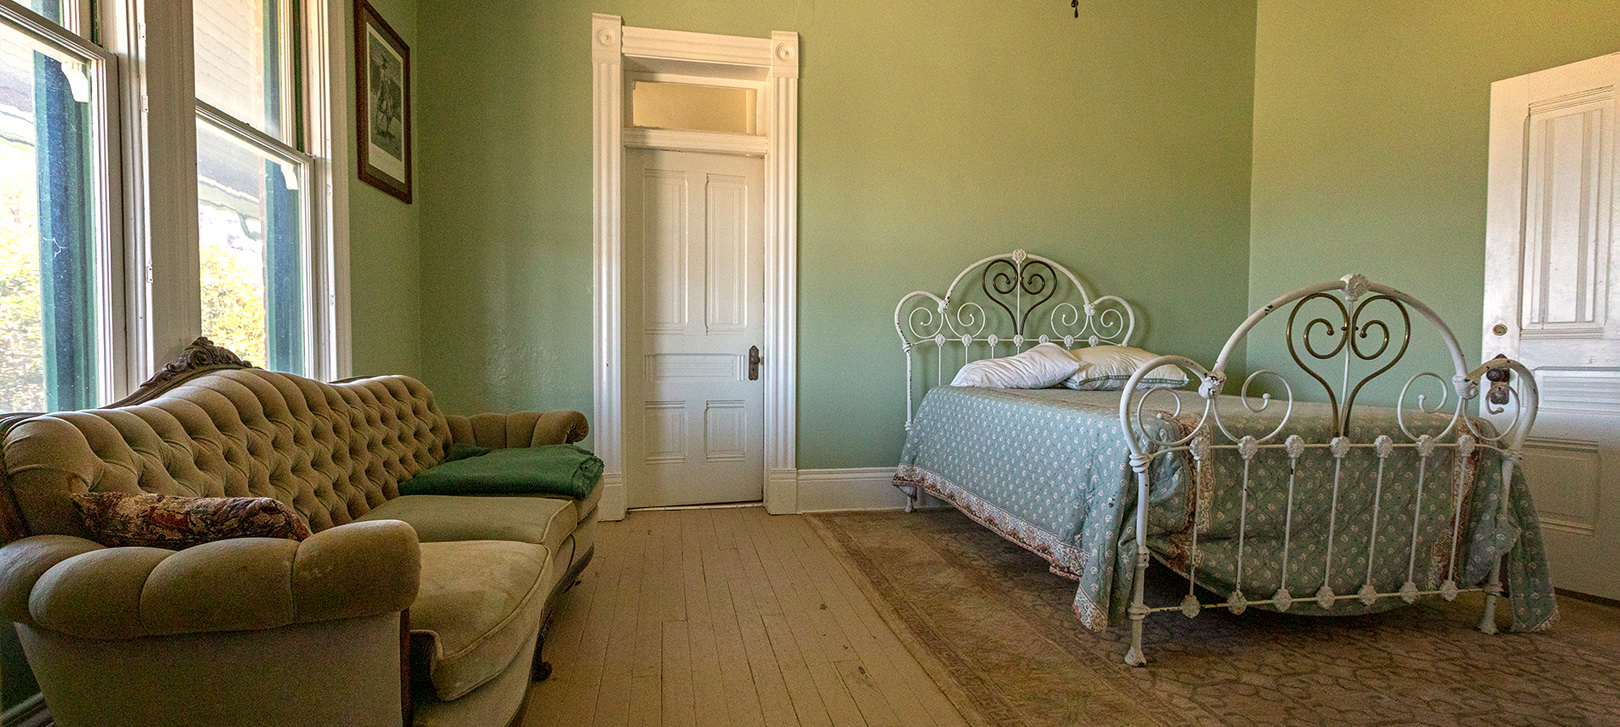 A sofa and bed with old-fashioned head and footboards inside a green room at the San Rafael Ranch House